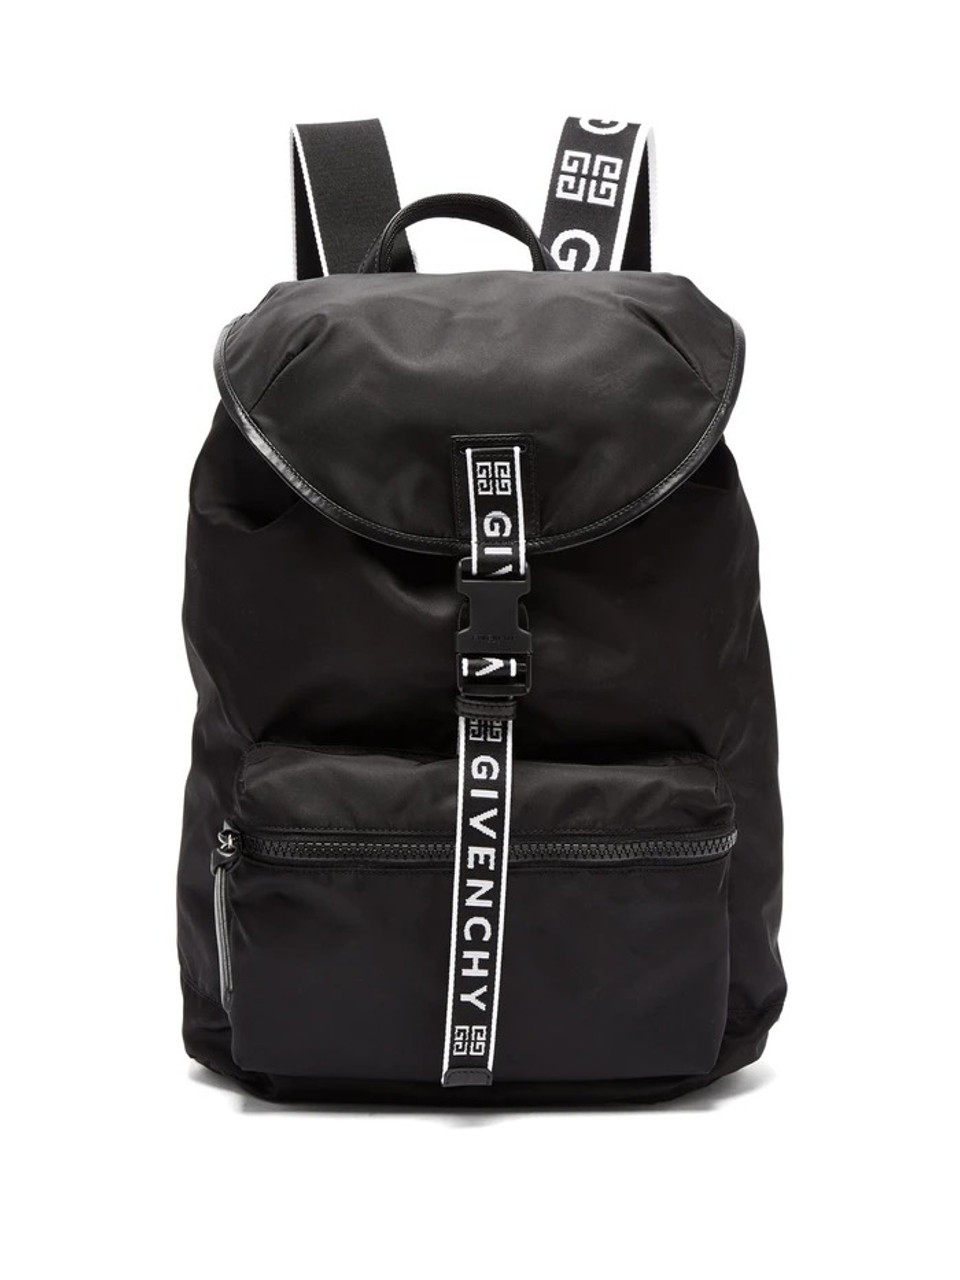 GIVENCHY LIGHT 3 LEATHER TRIMMED NYLON BACKPACK